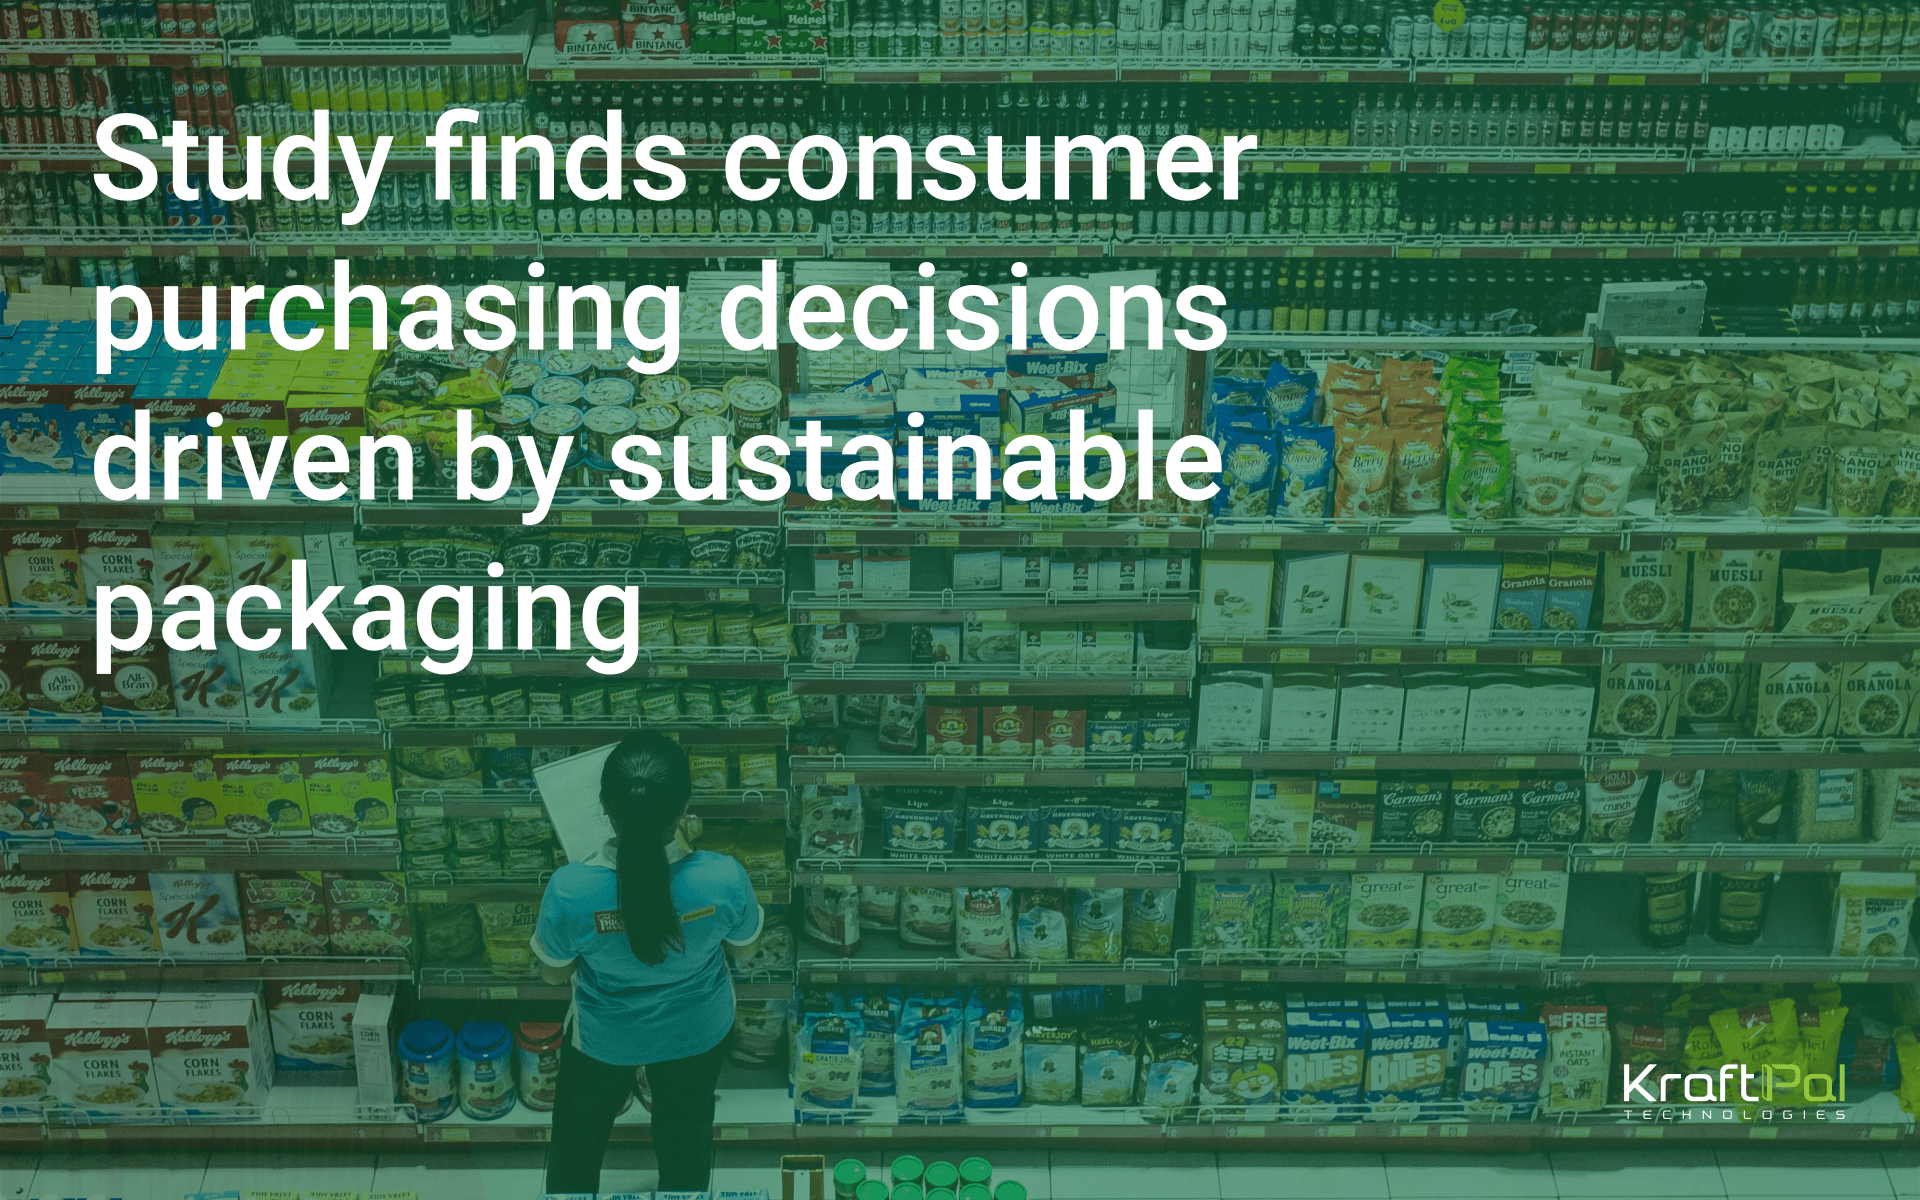 Study finds consumer purchasing decisions driven by sustainable packaging